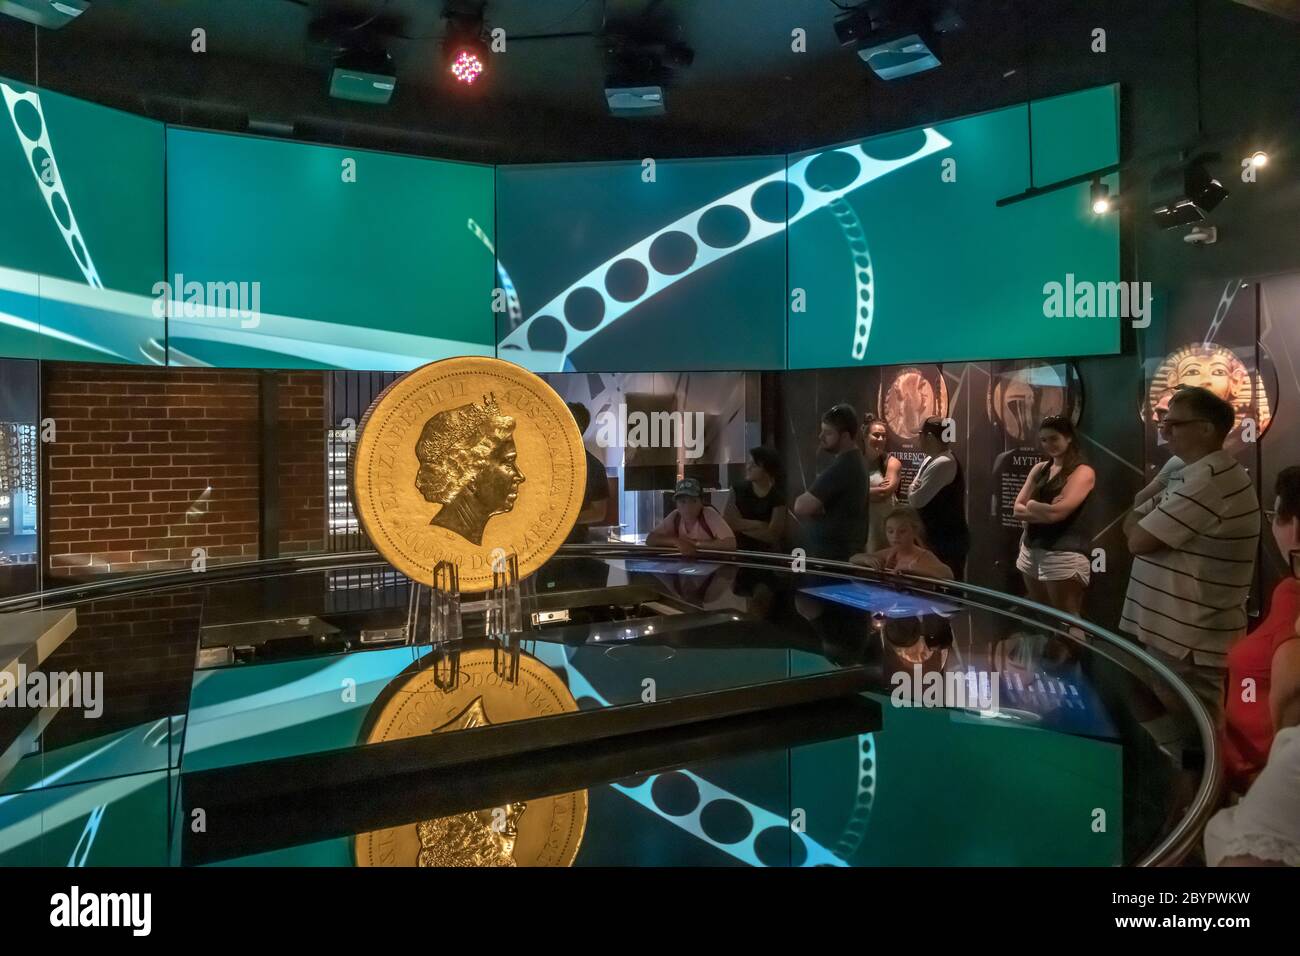 Visitors looking at the World's larges gold coin, the 1 tonne Australian Kangaroo, Perth Mint, Perth, Western Australia, Australia. Stock Photo